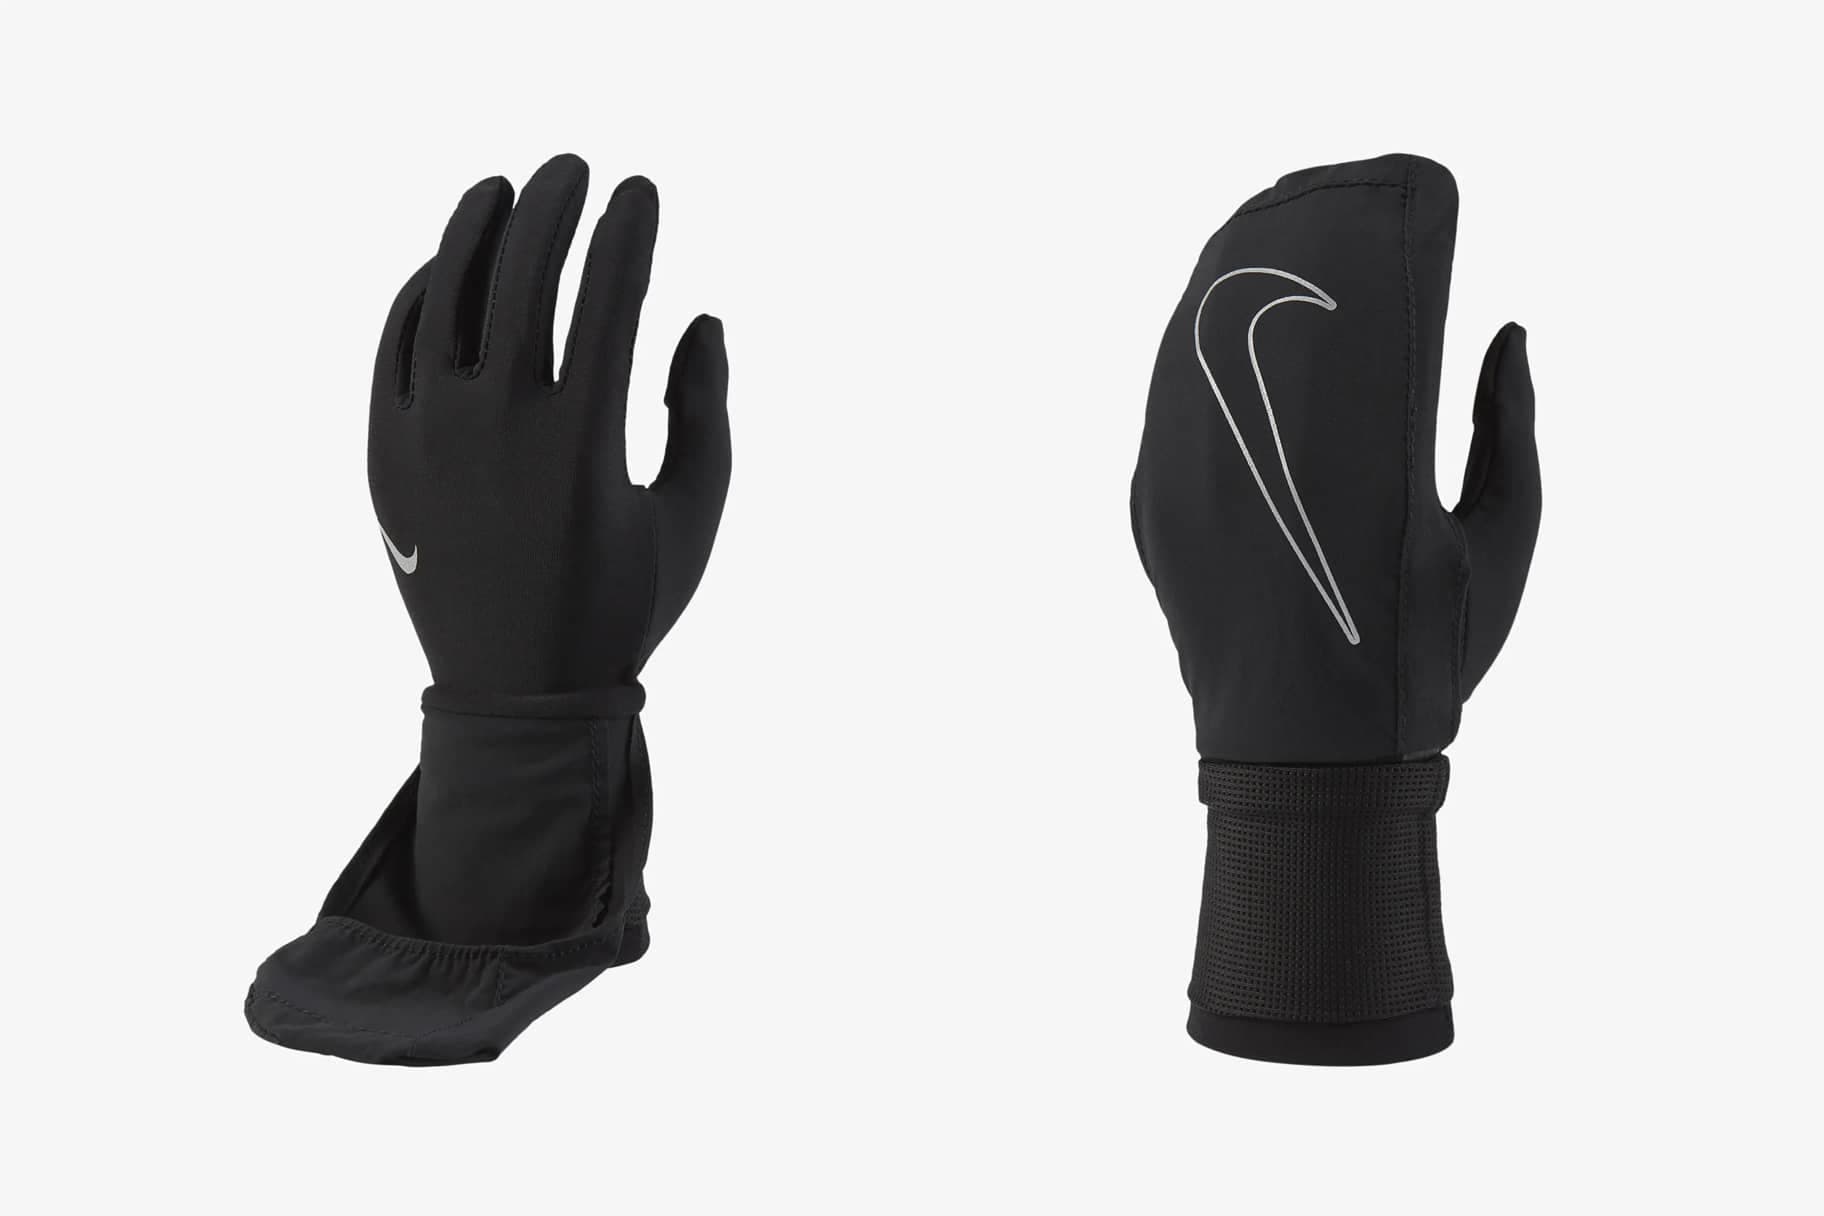 Running Gloves You Can Buy at Nike 